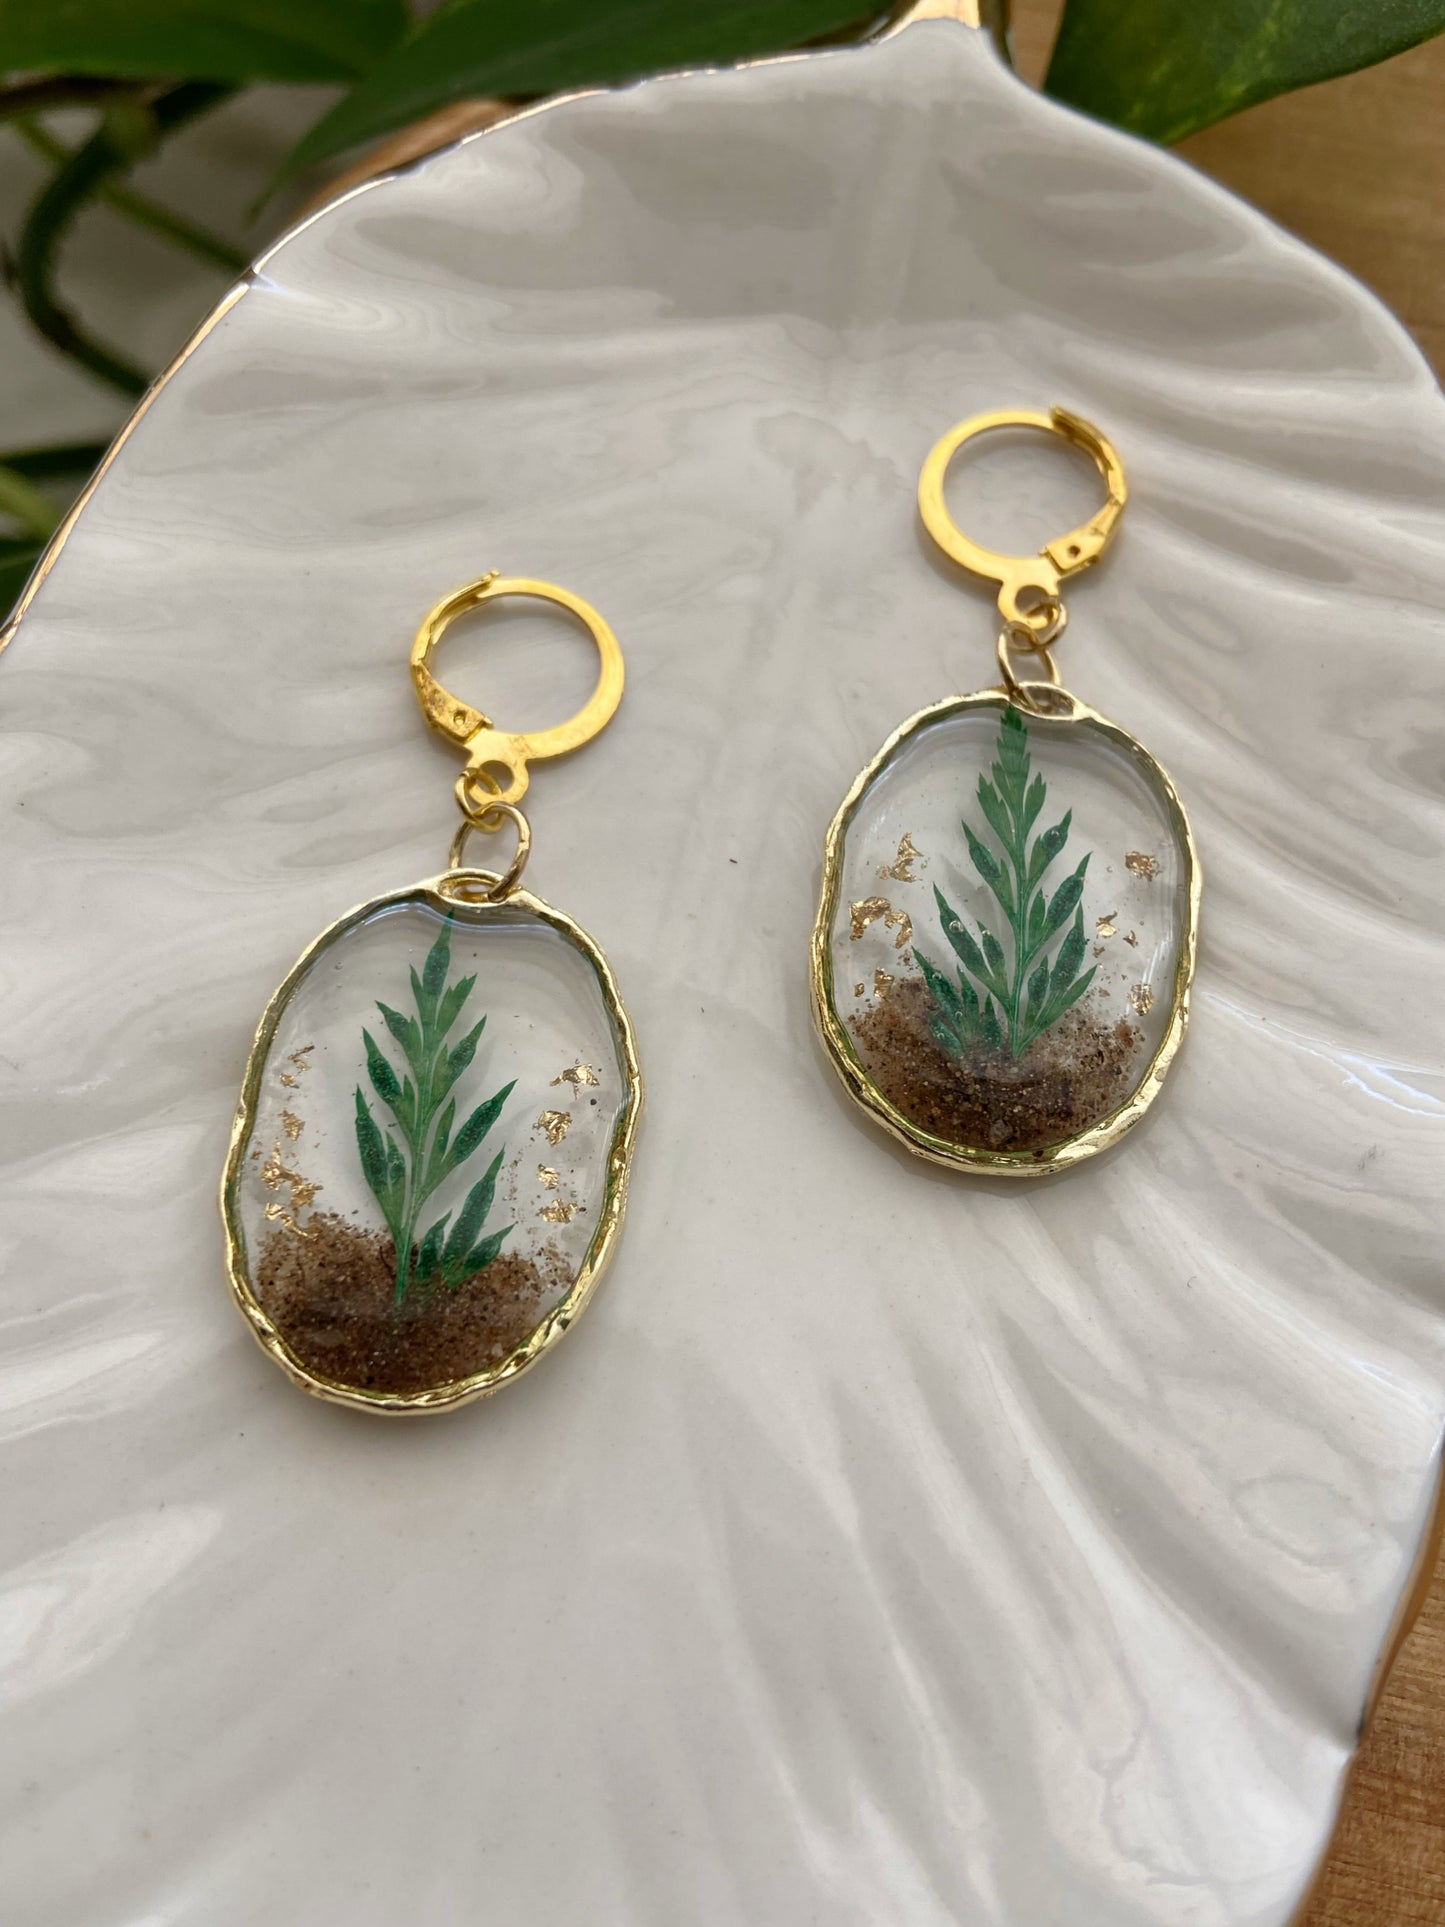 Mini Oval Terrariums- Gold open earrings filled with real soil, plants & gold flakes, clasp hoop earring